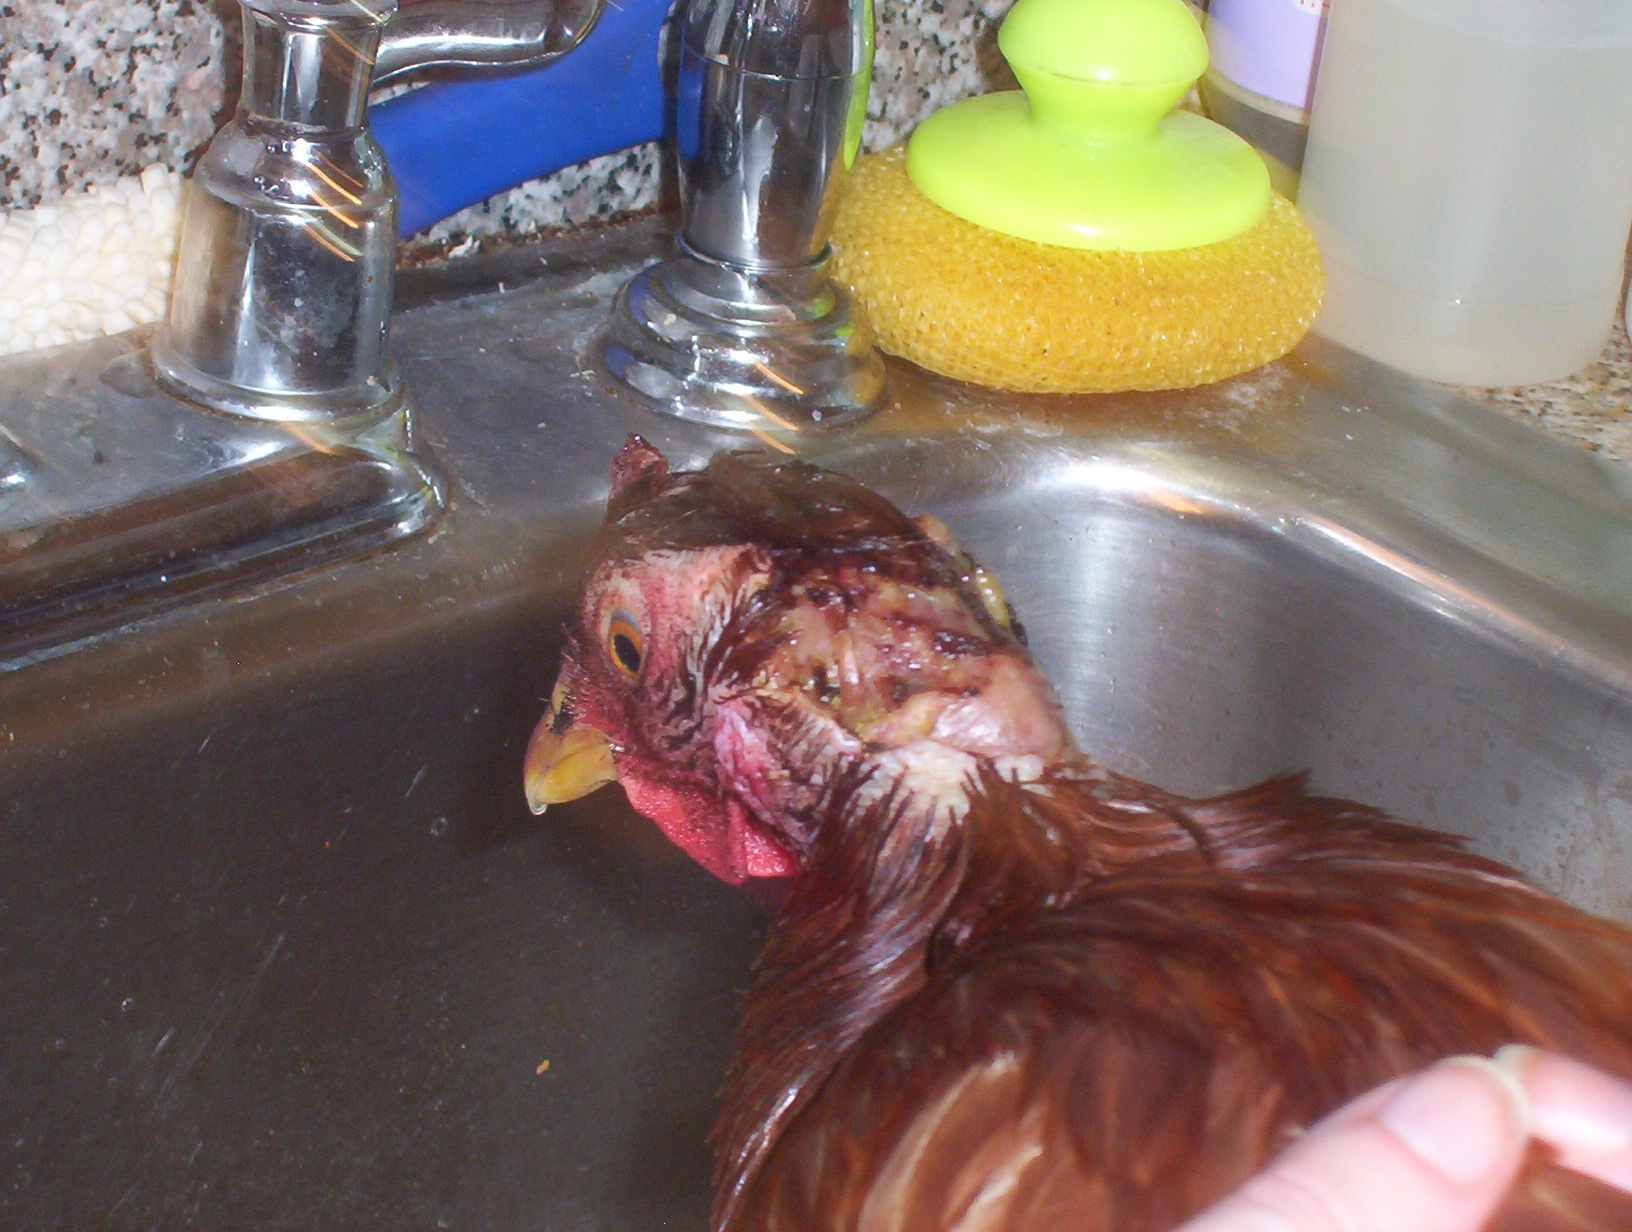 Omlet (my Rhode Island Red) after being attacked by Mocha.